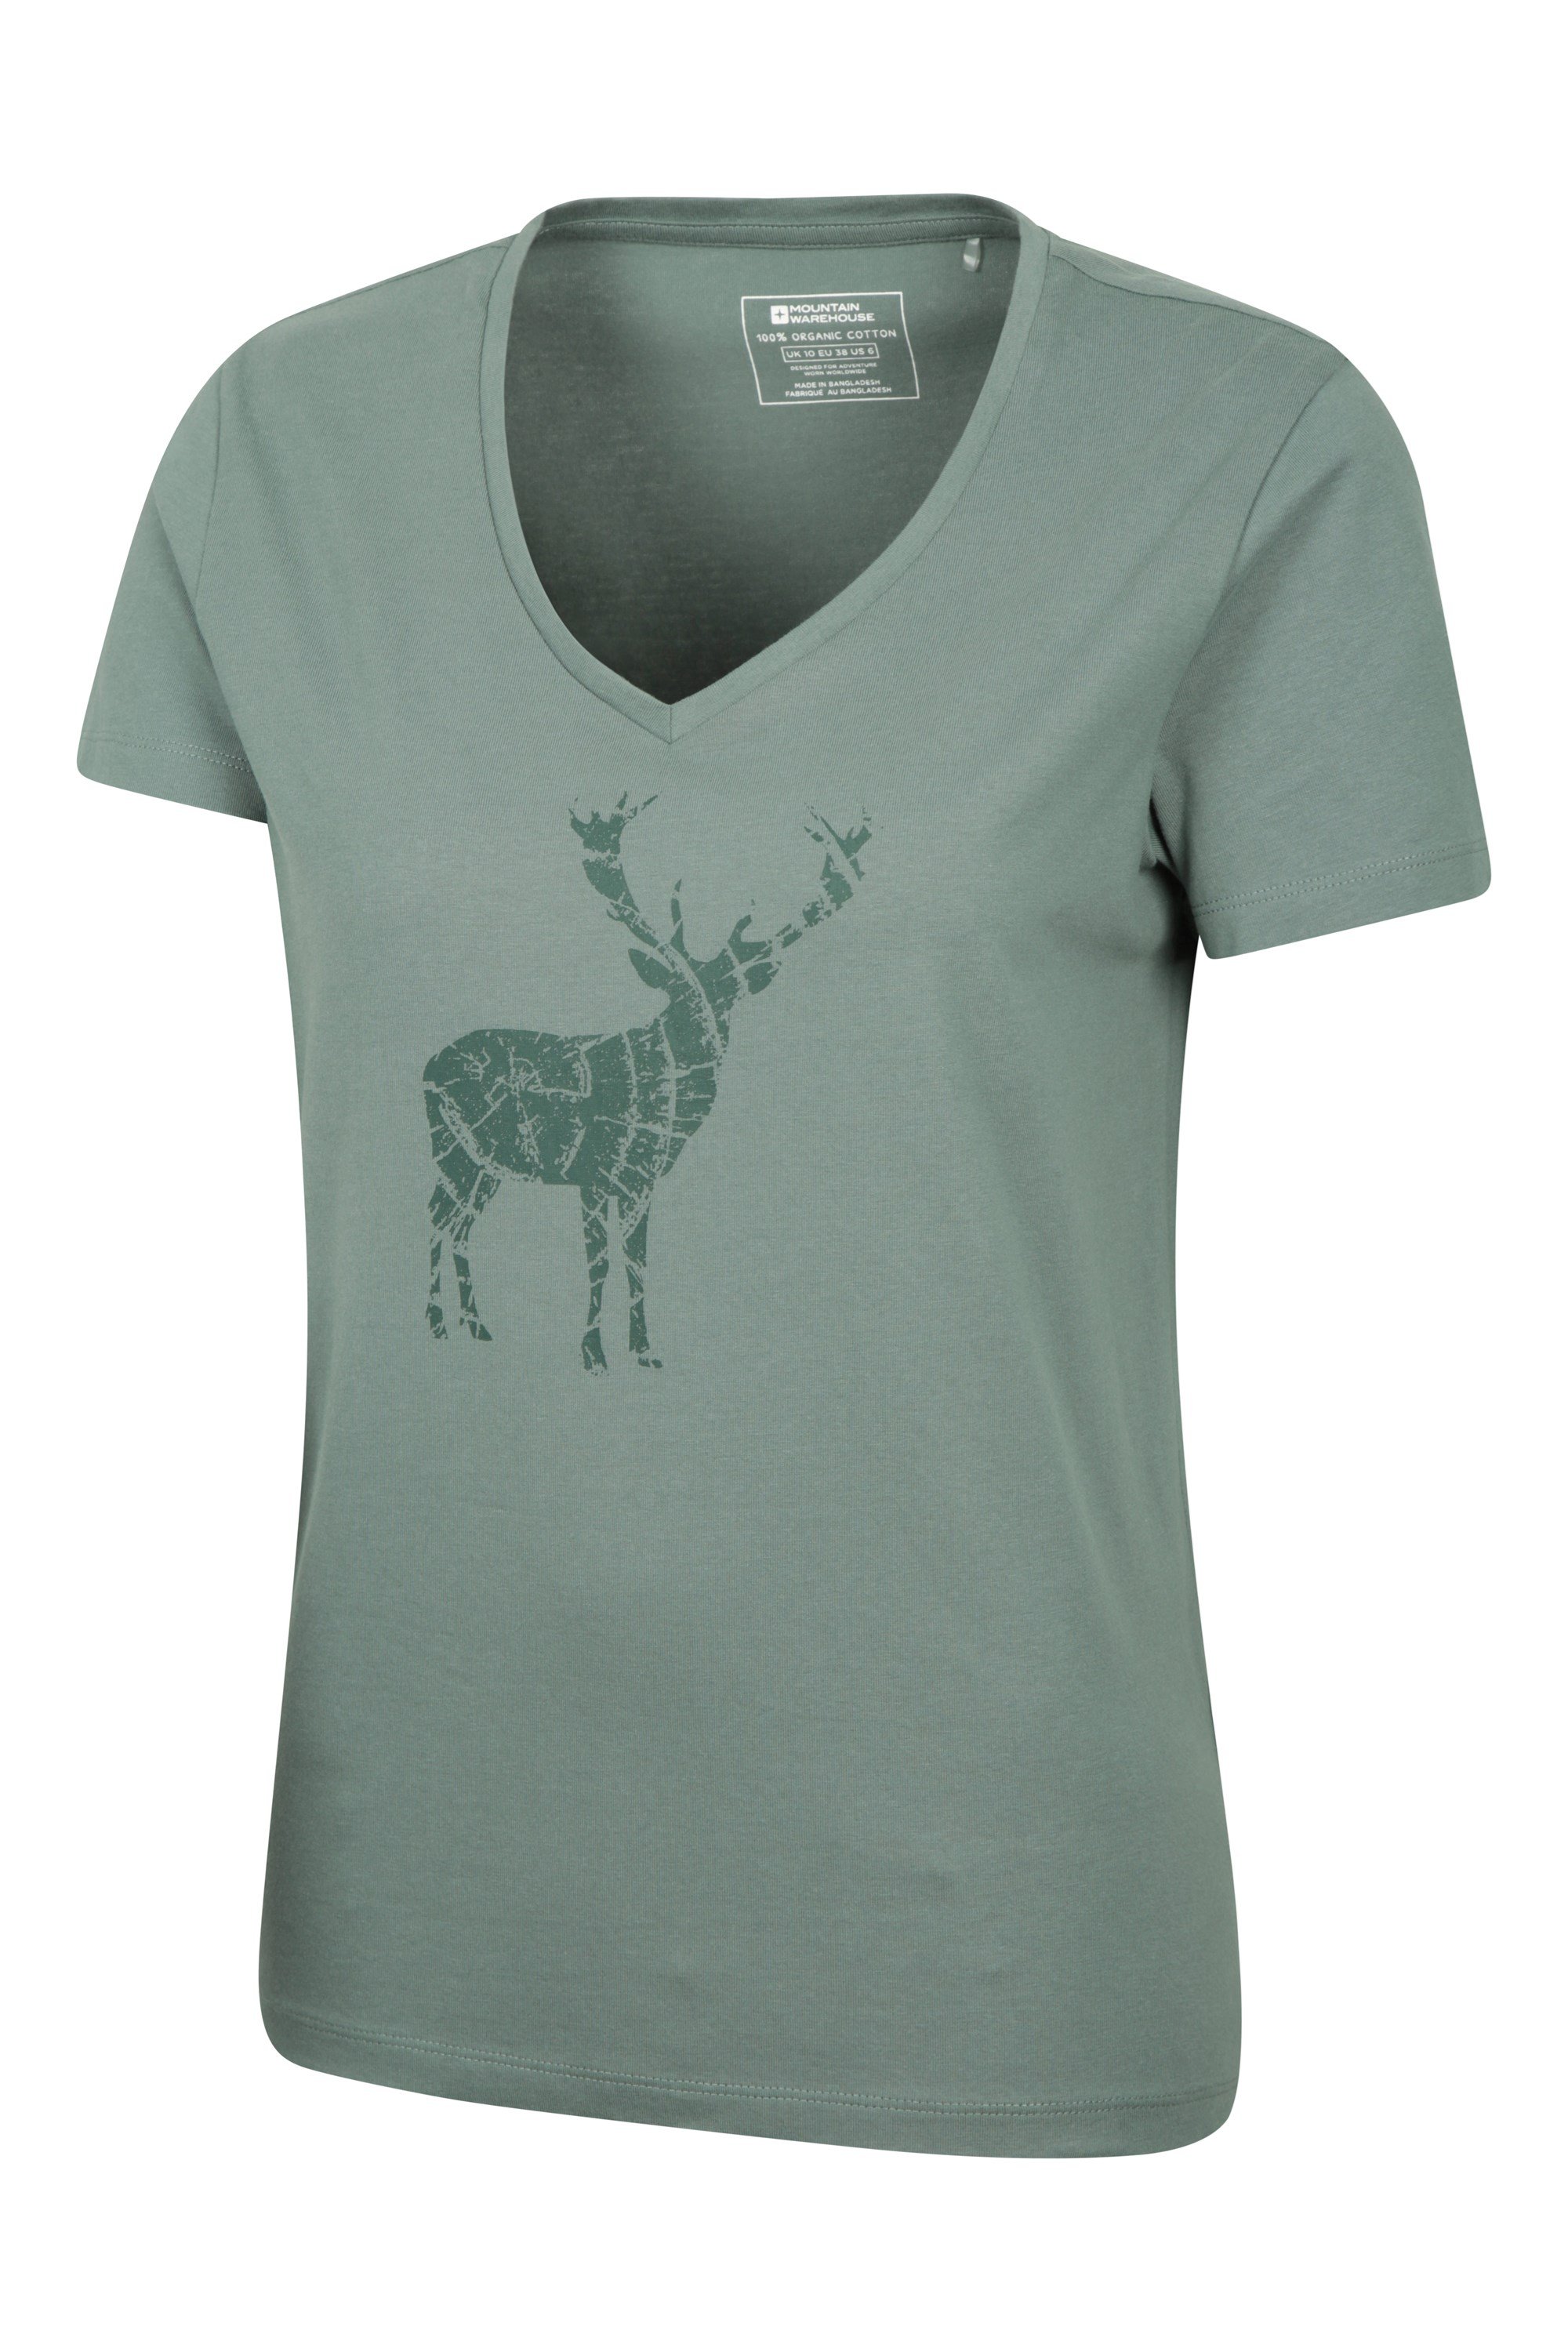 Stag Womens Loose Fit Organic T-Shirt